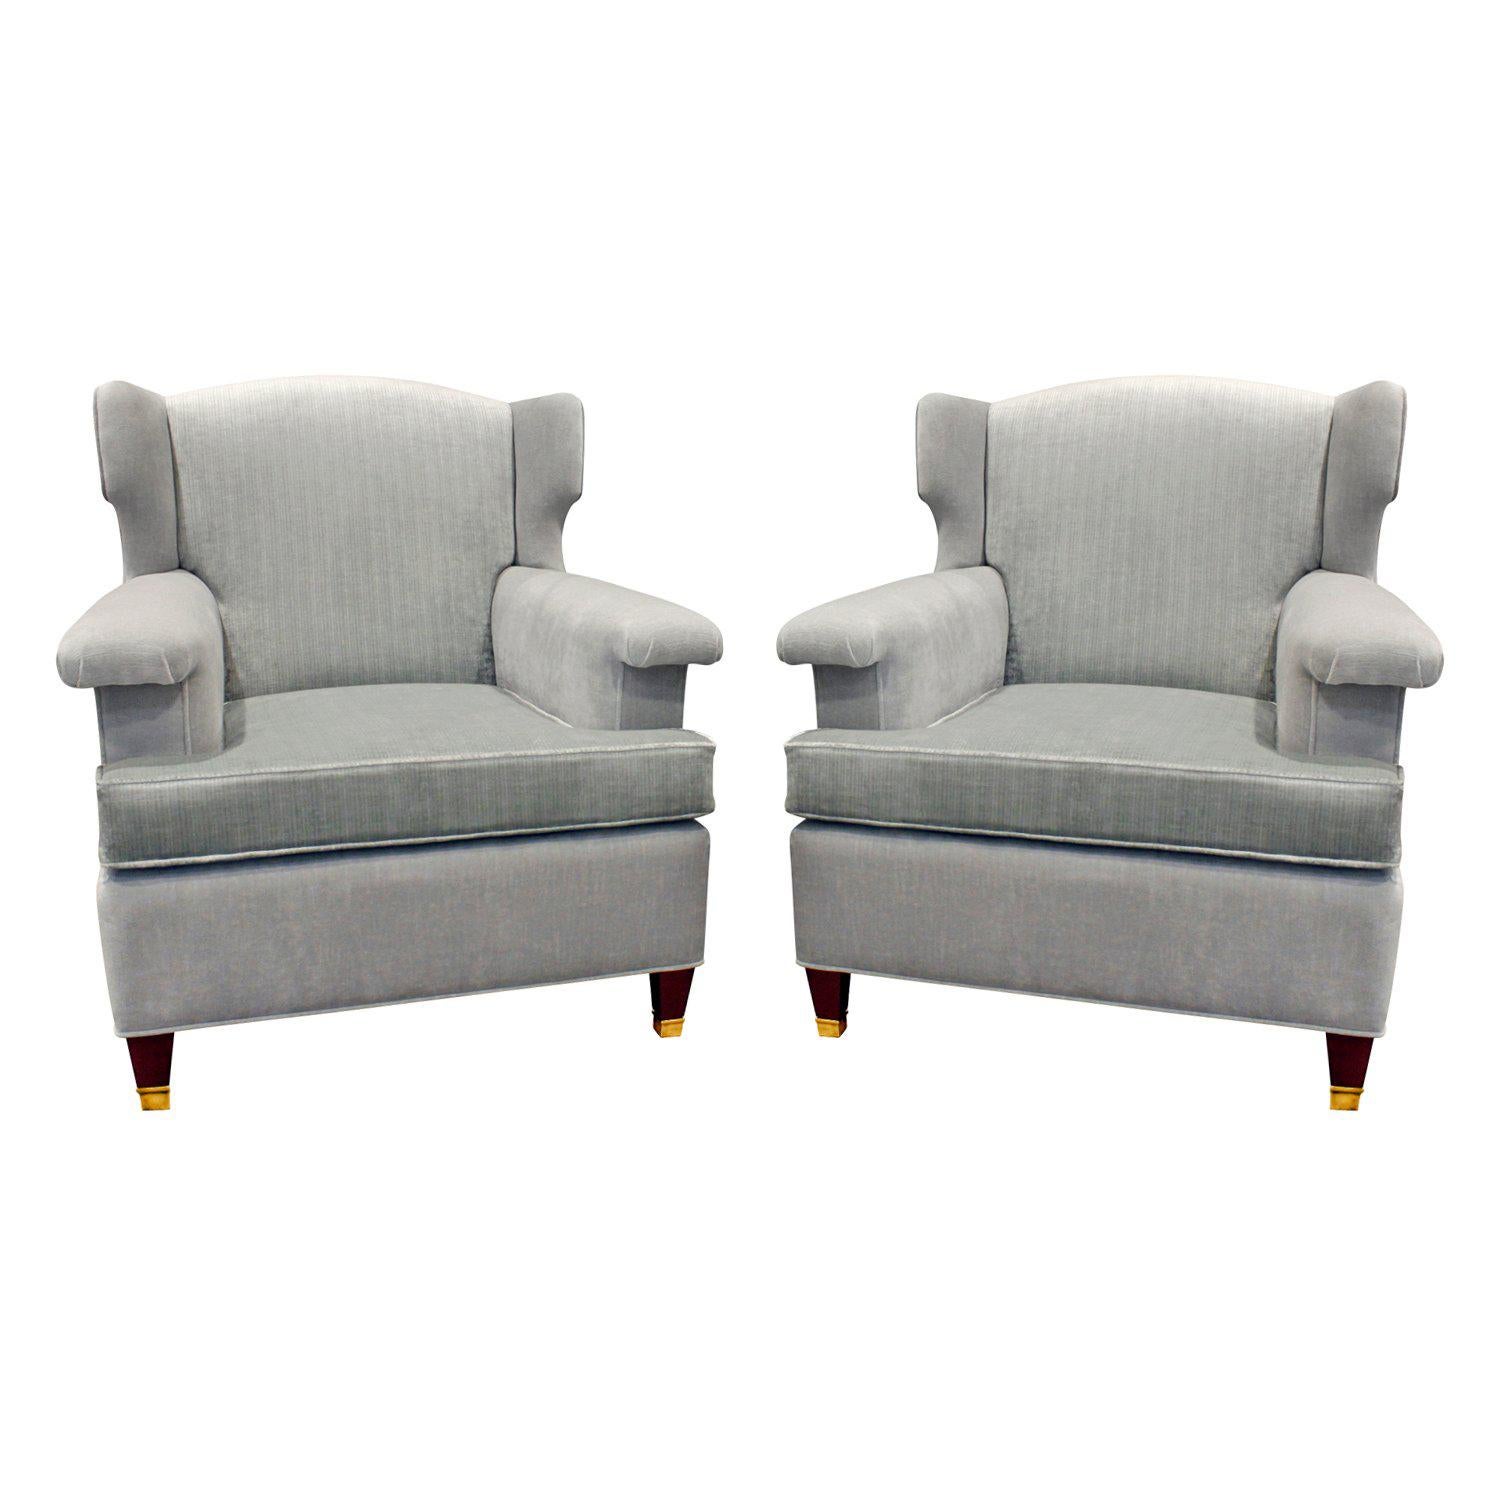 Pair Of Elegant Sculptural French Wing Chairs, 1950s